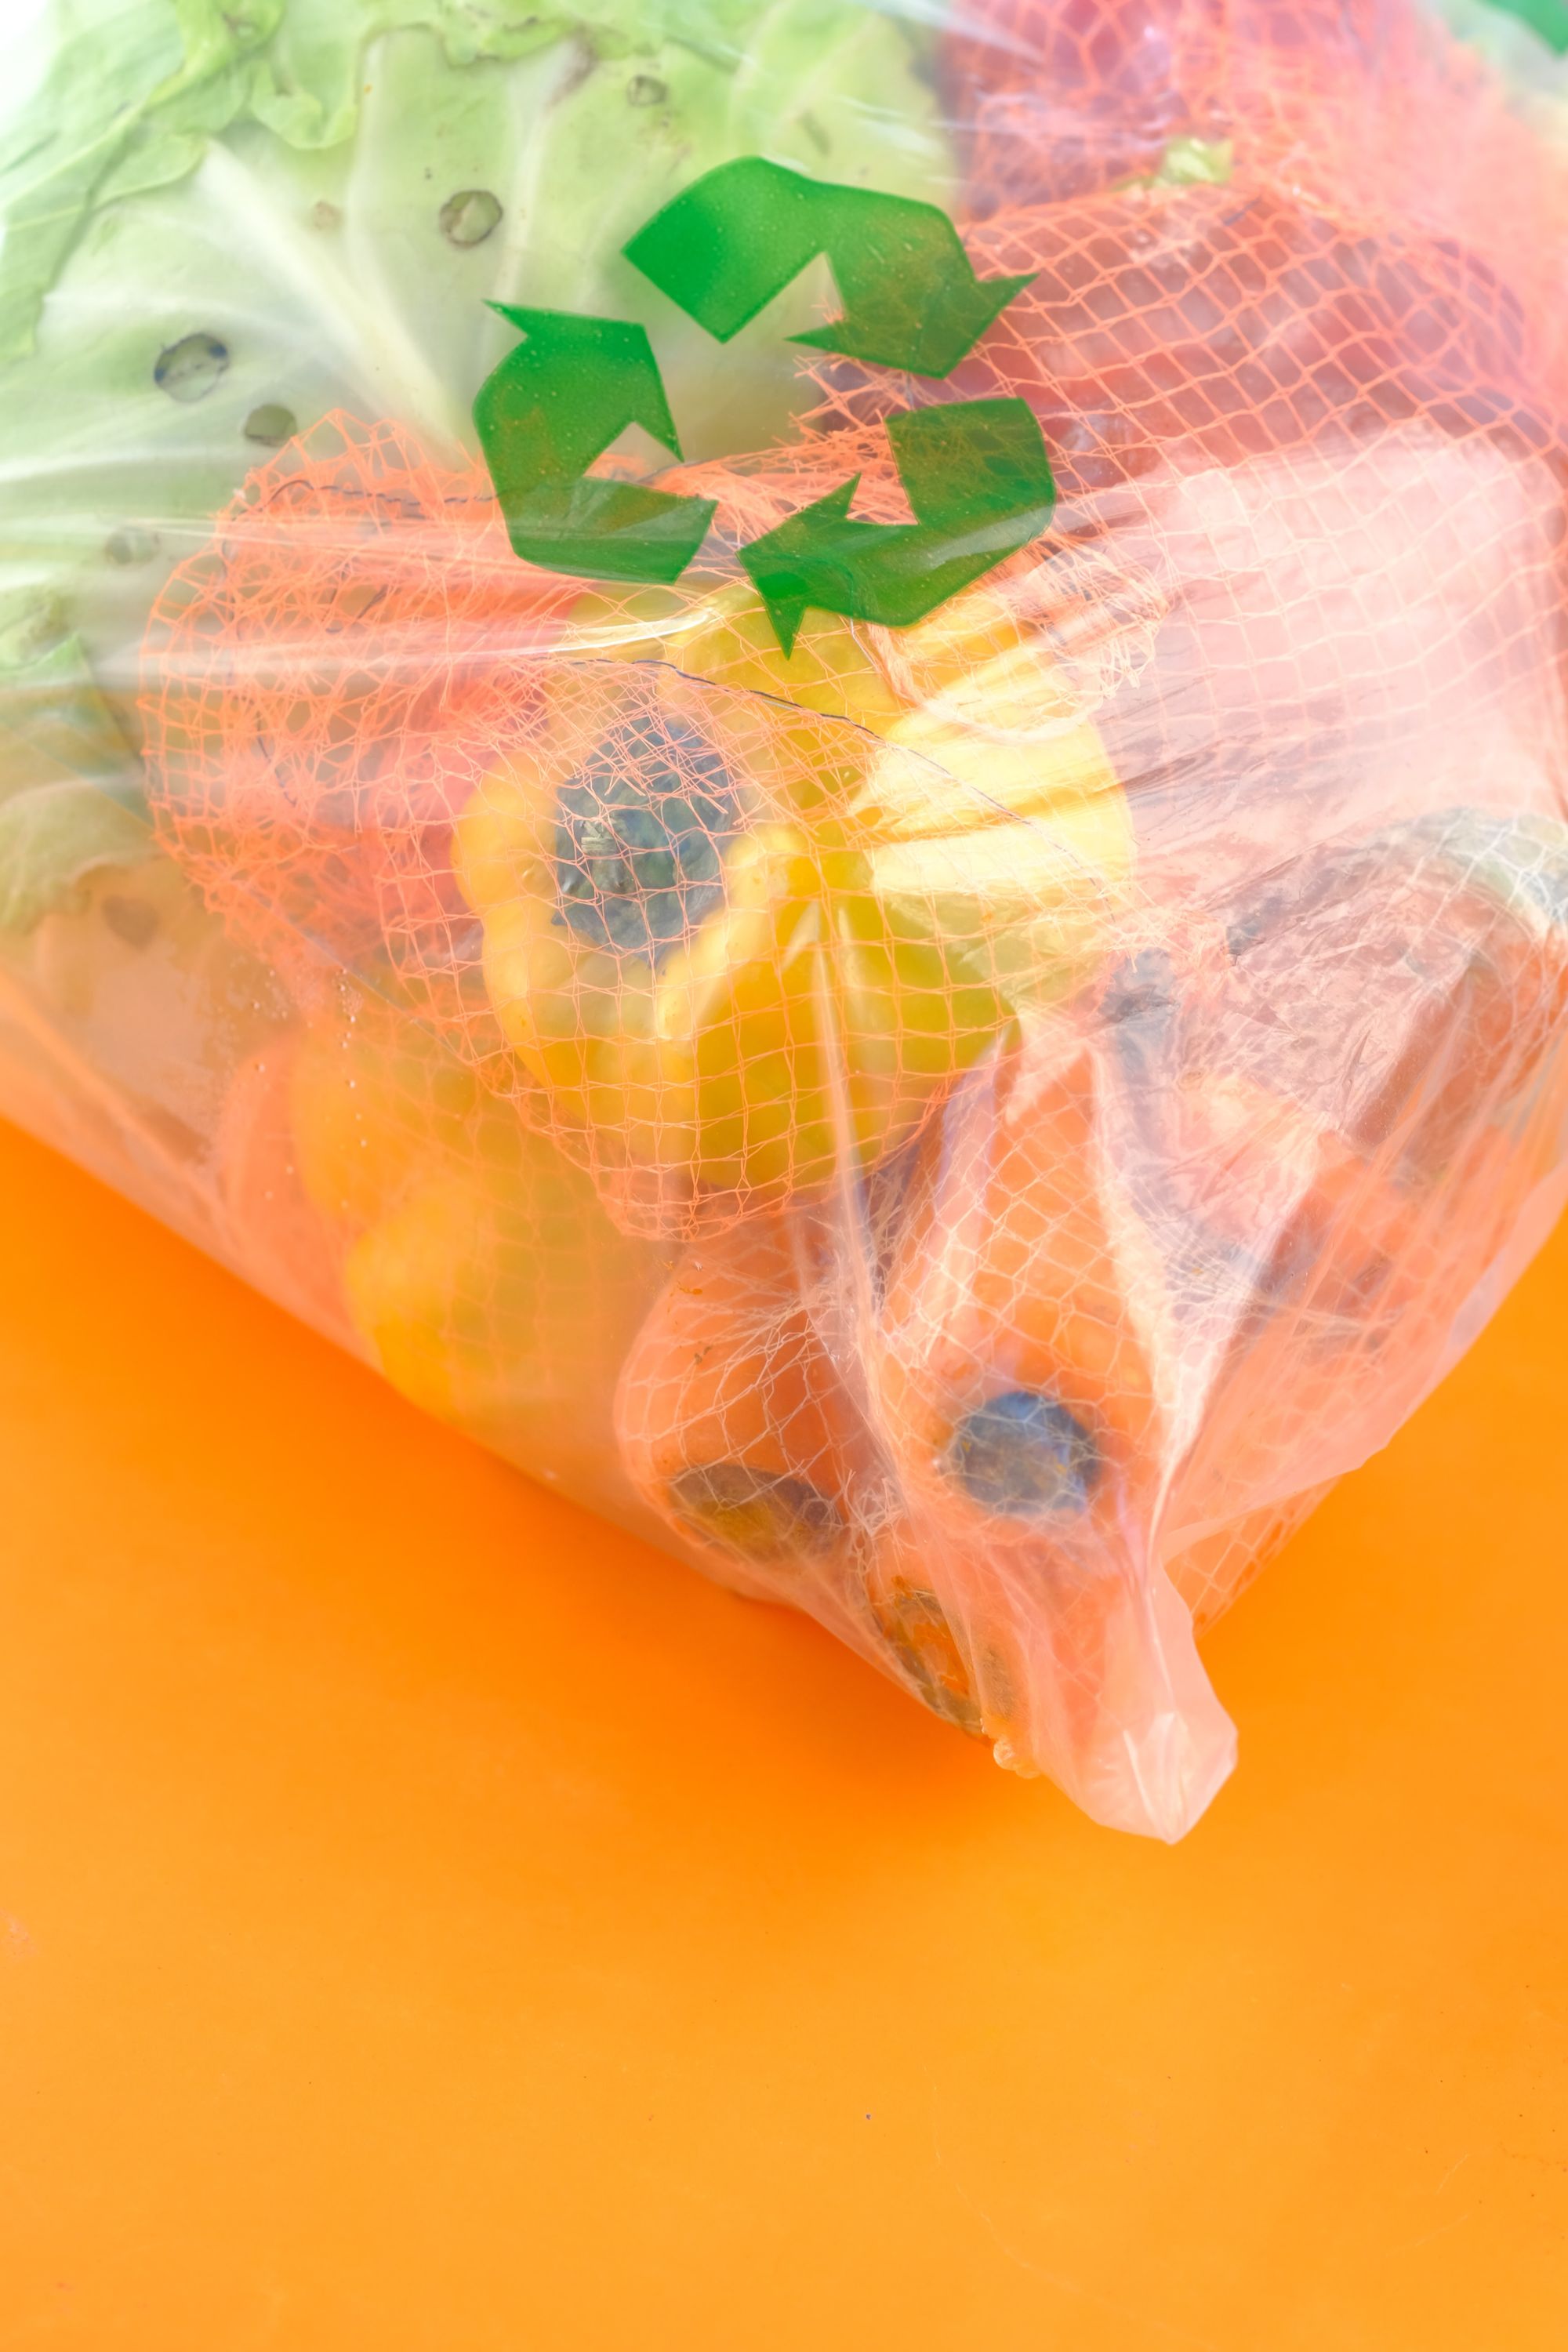 How Sustainable is Plastic Manufacturing?